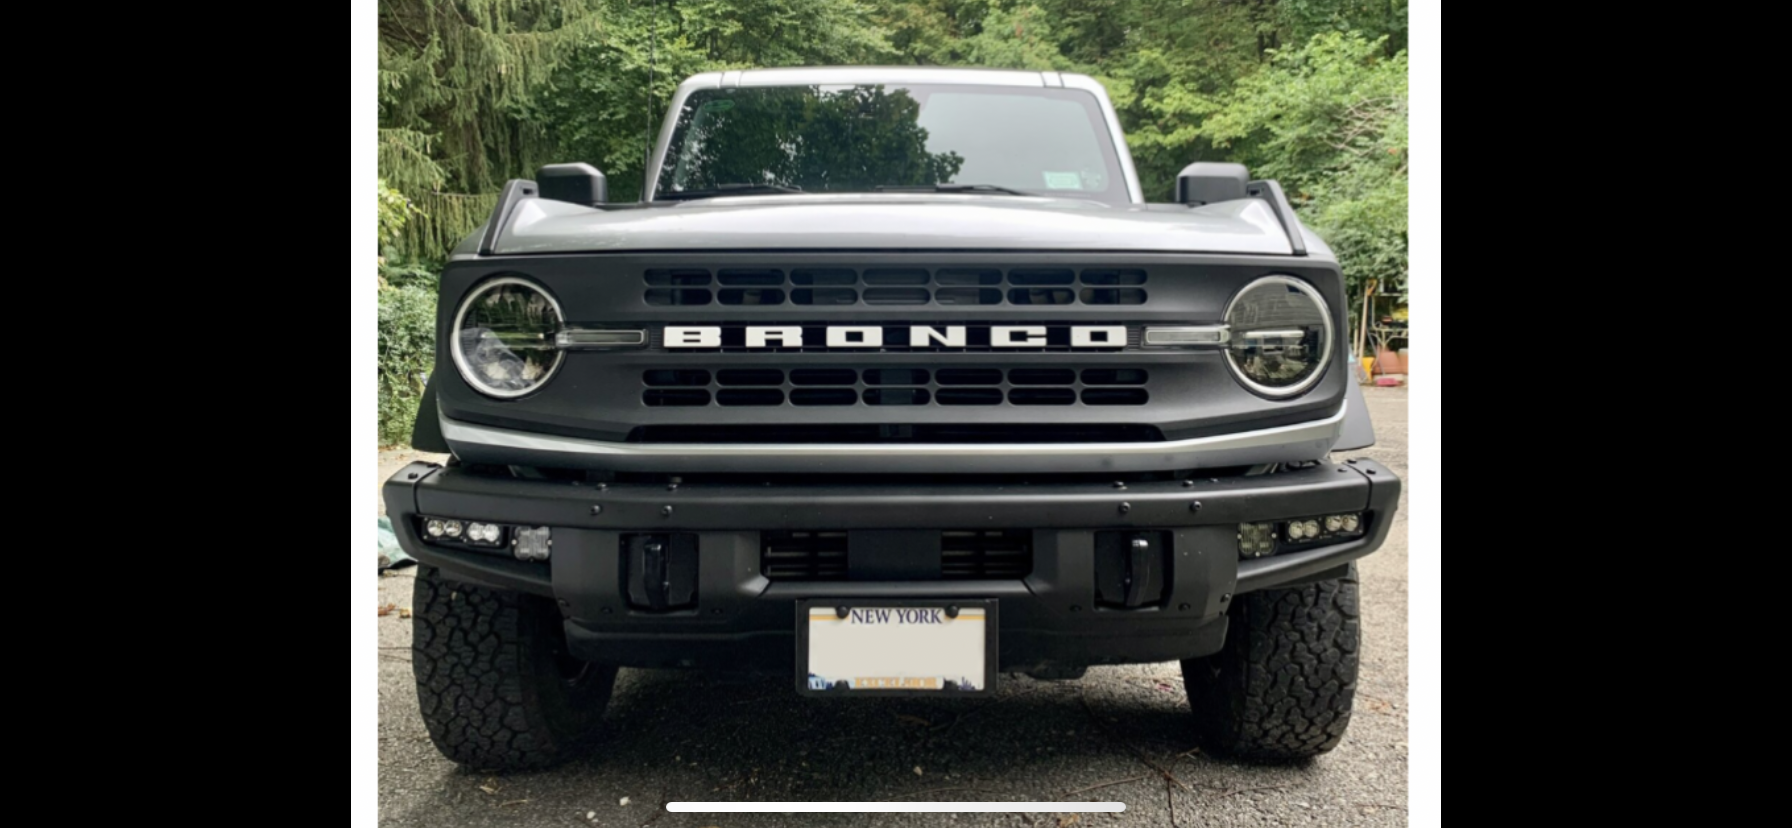 Ford Bronco PRICE DROP -FRONT LICENSE PLATE BRACKETS For Your Bronco 51F5EB75-5CA1-4499-9844-A530744F01BF